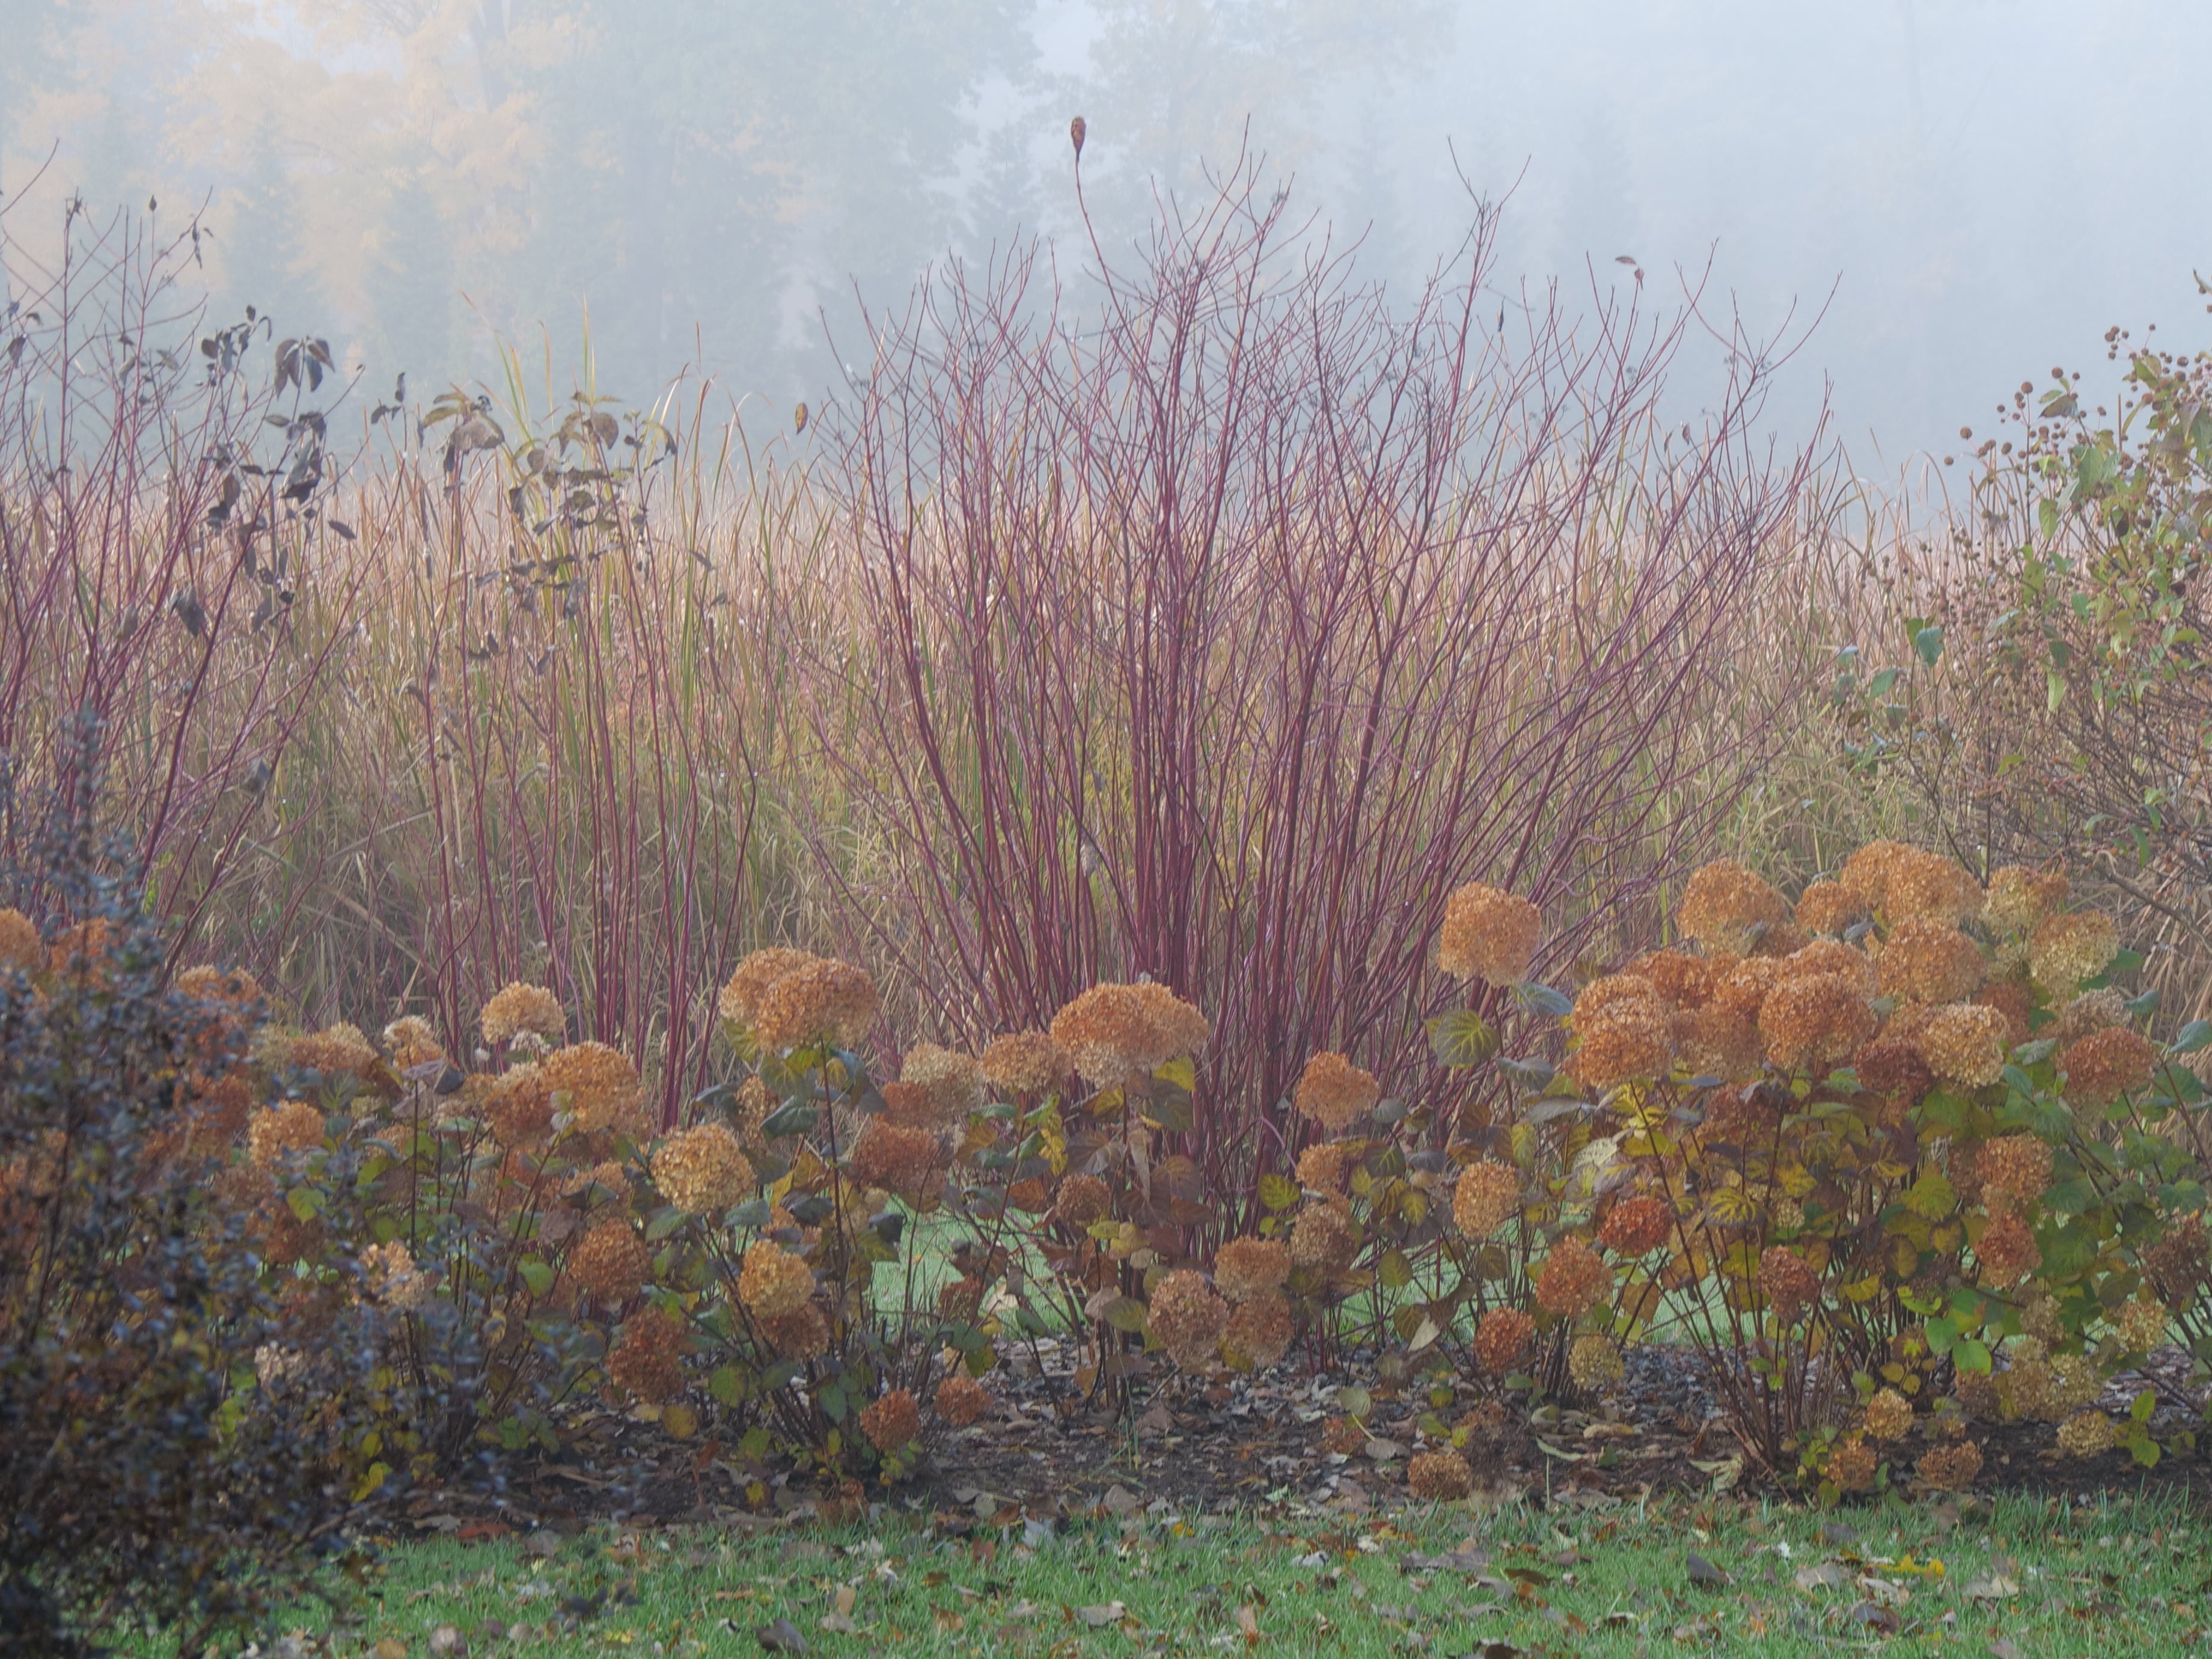 Arctic Fire Red dogwood in a landscape in autumn showing its red winter stems